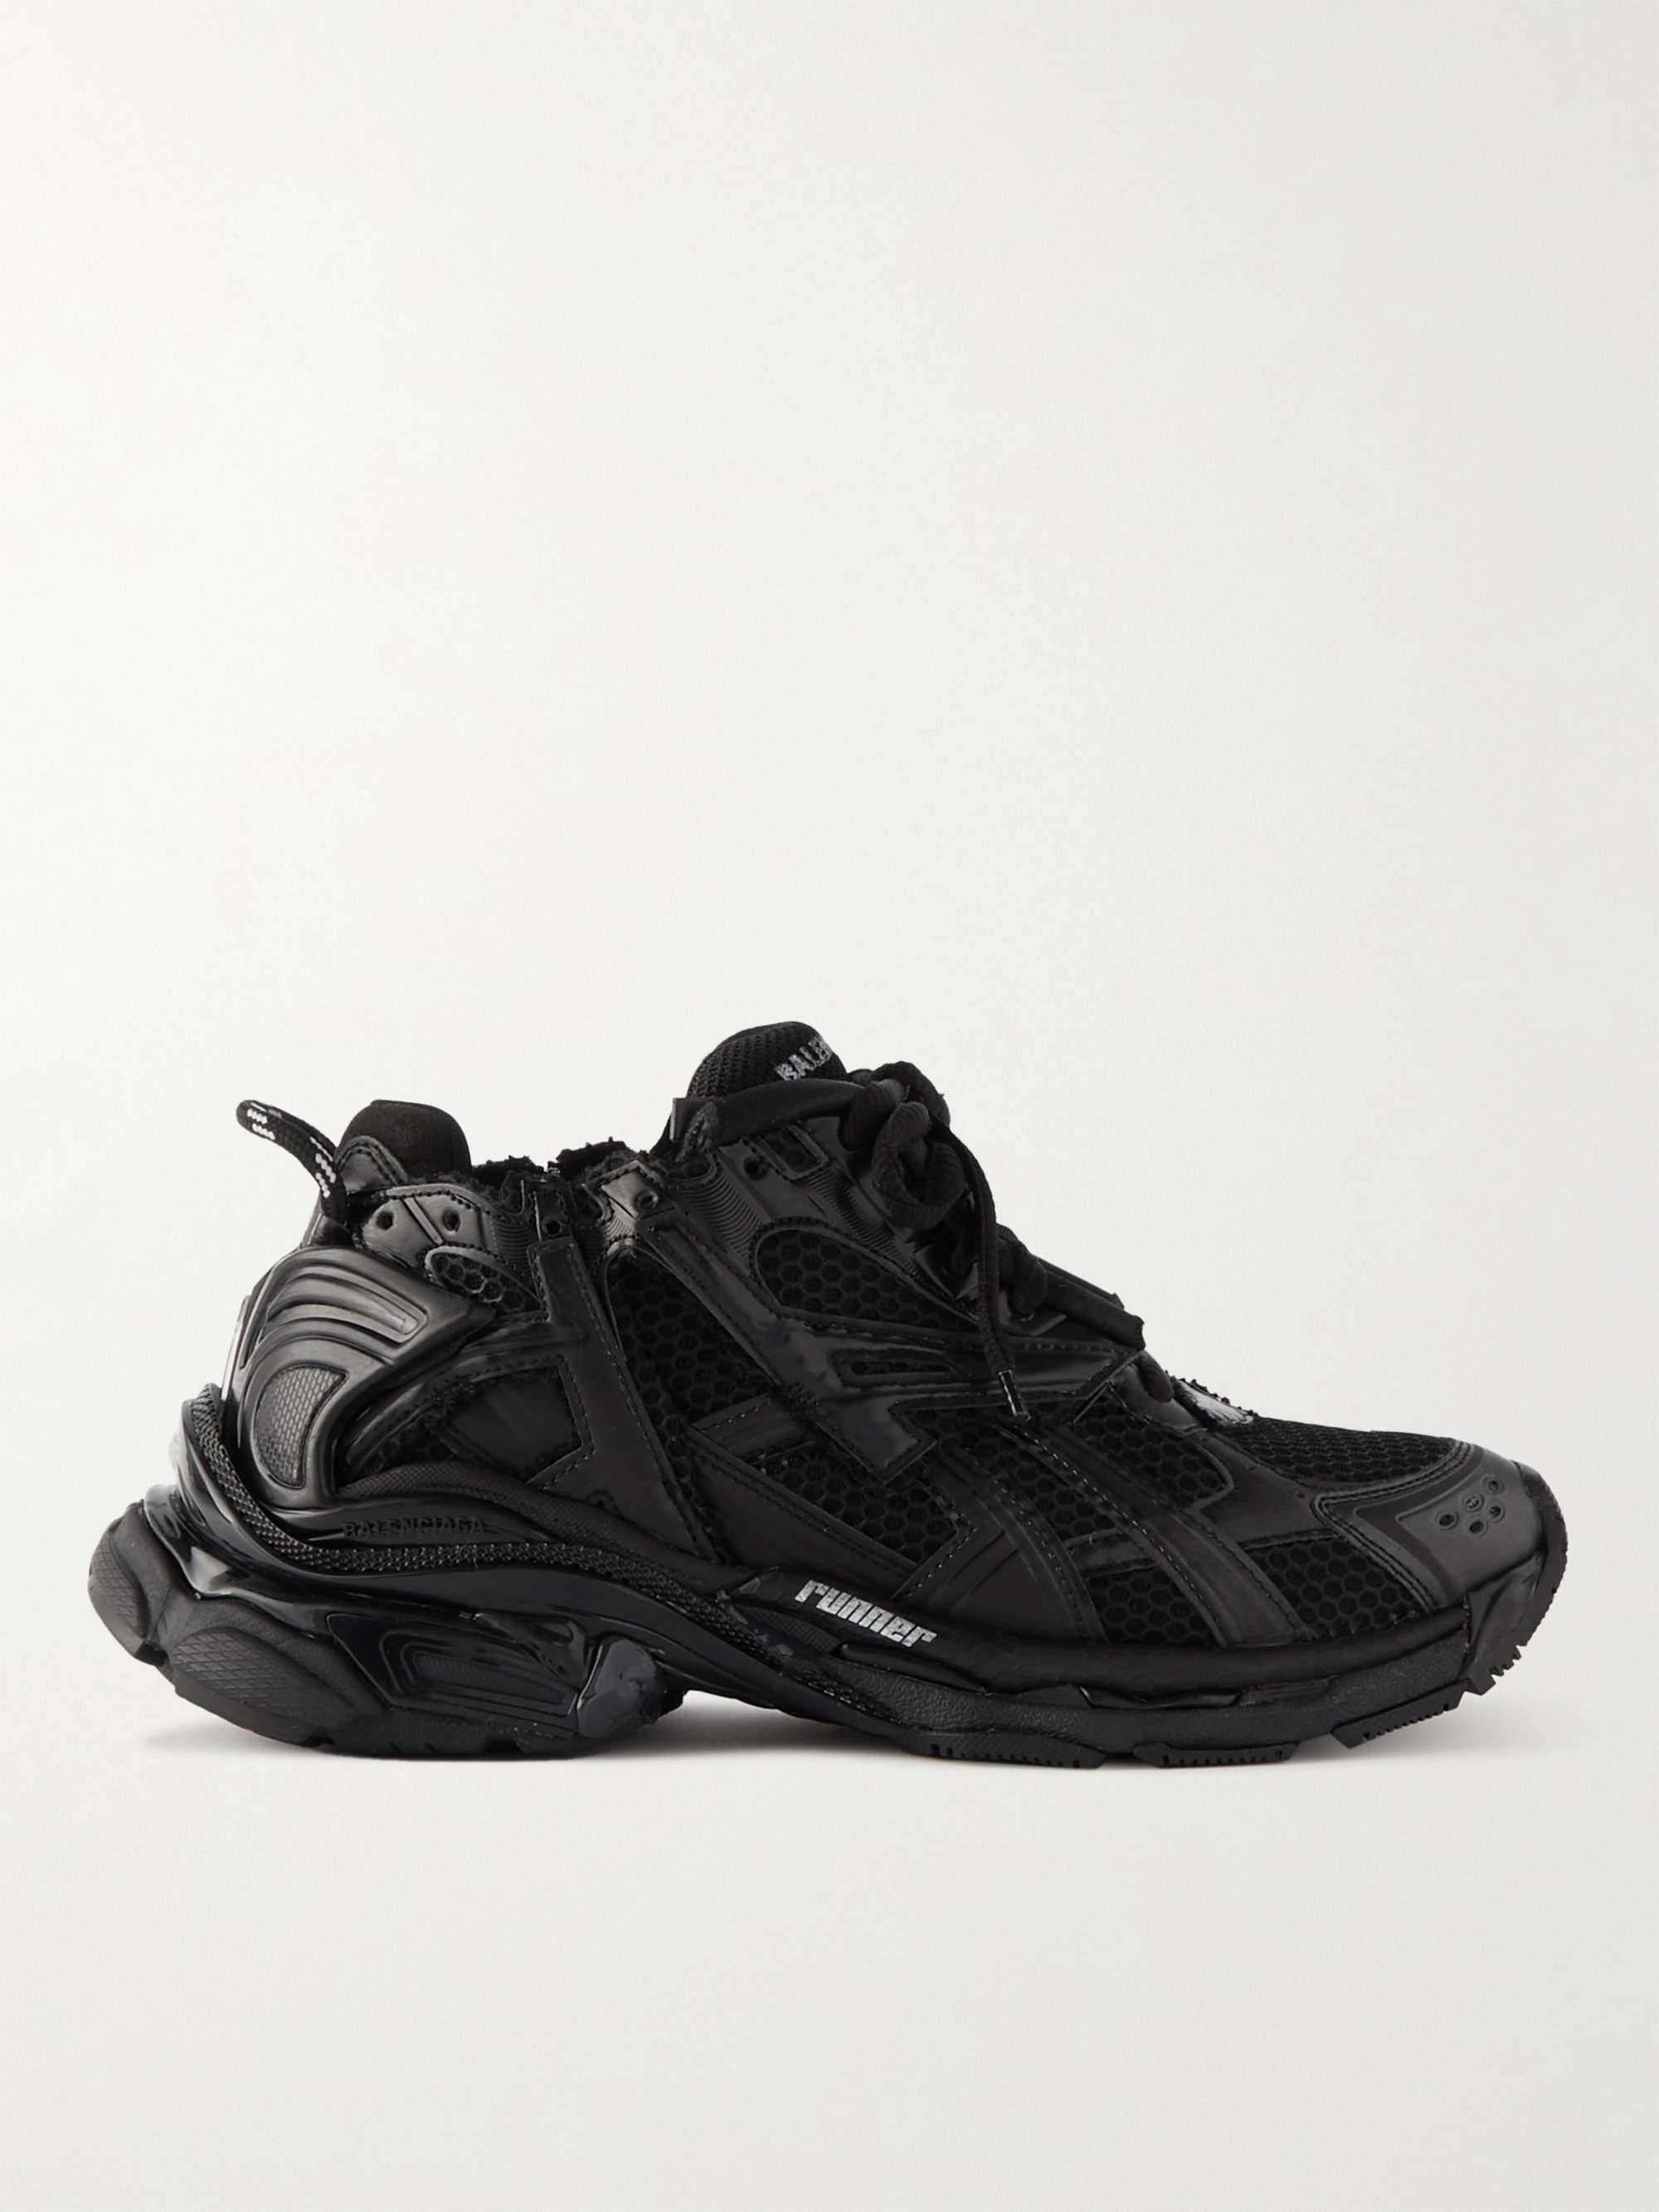 BALENCIAGA Triple S Faux Fur-Trimmed Mesh and Faux Leather Sneakers for Men  | MR PORTER